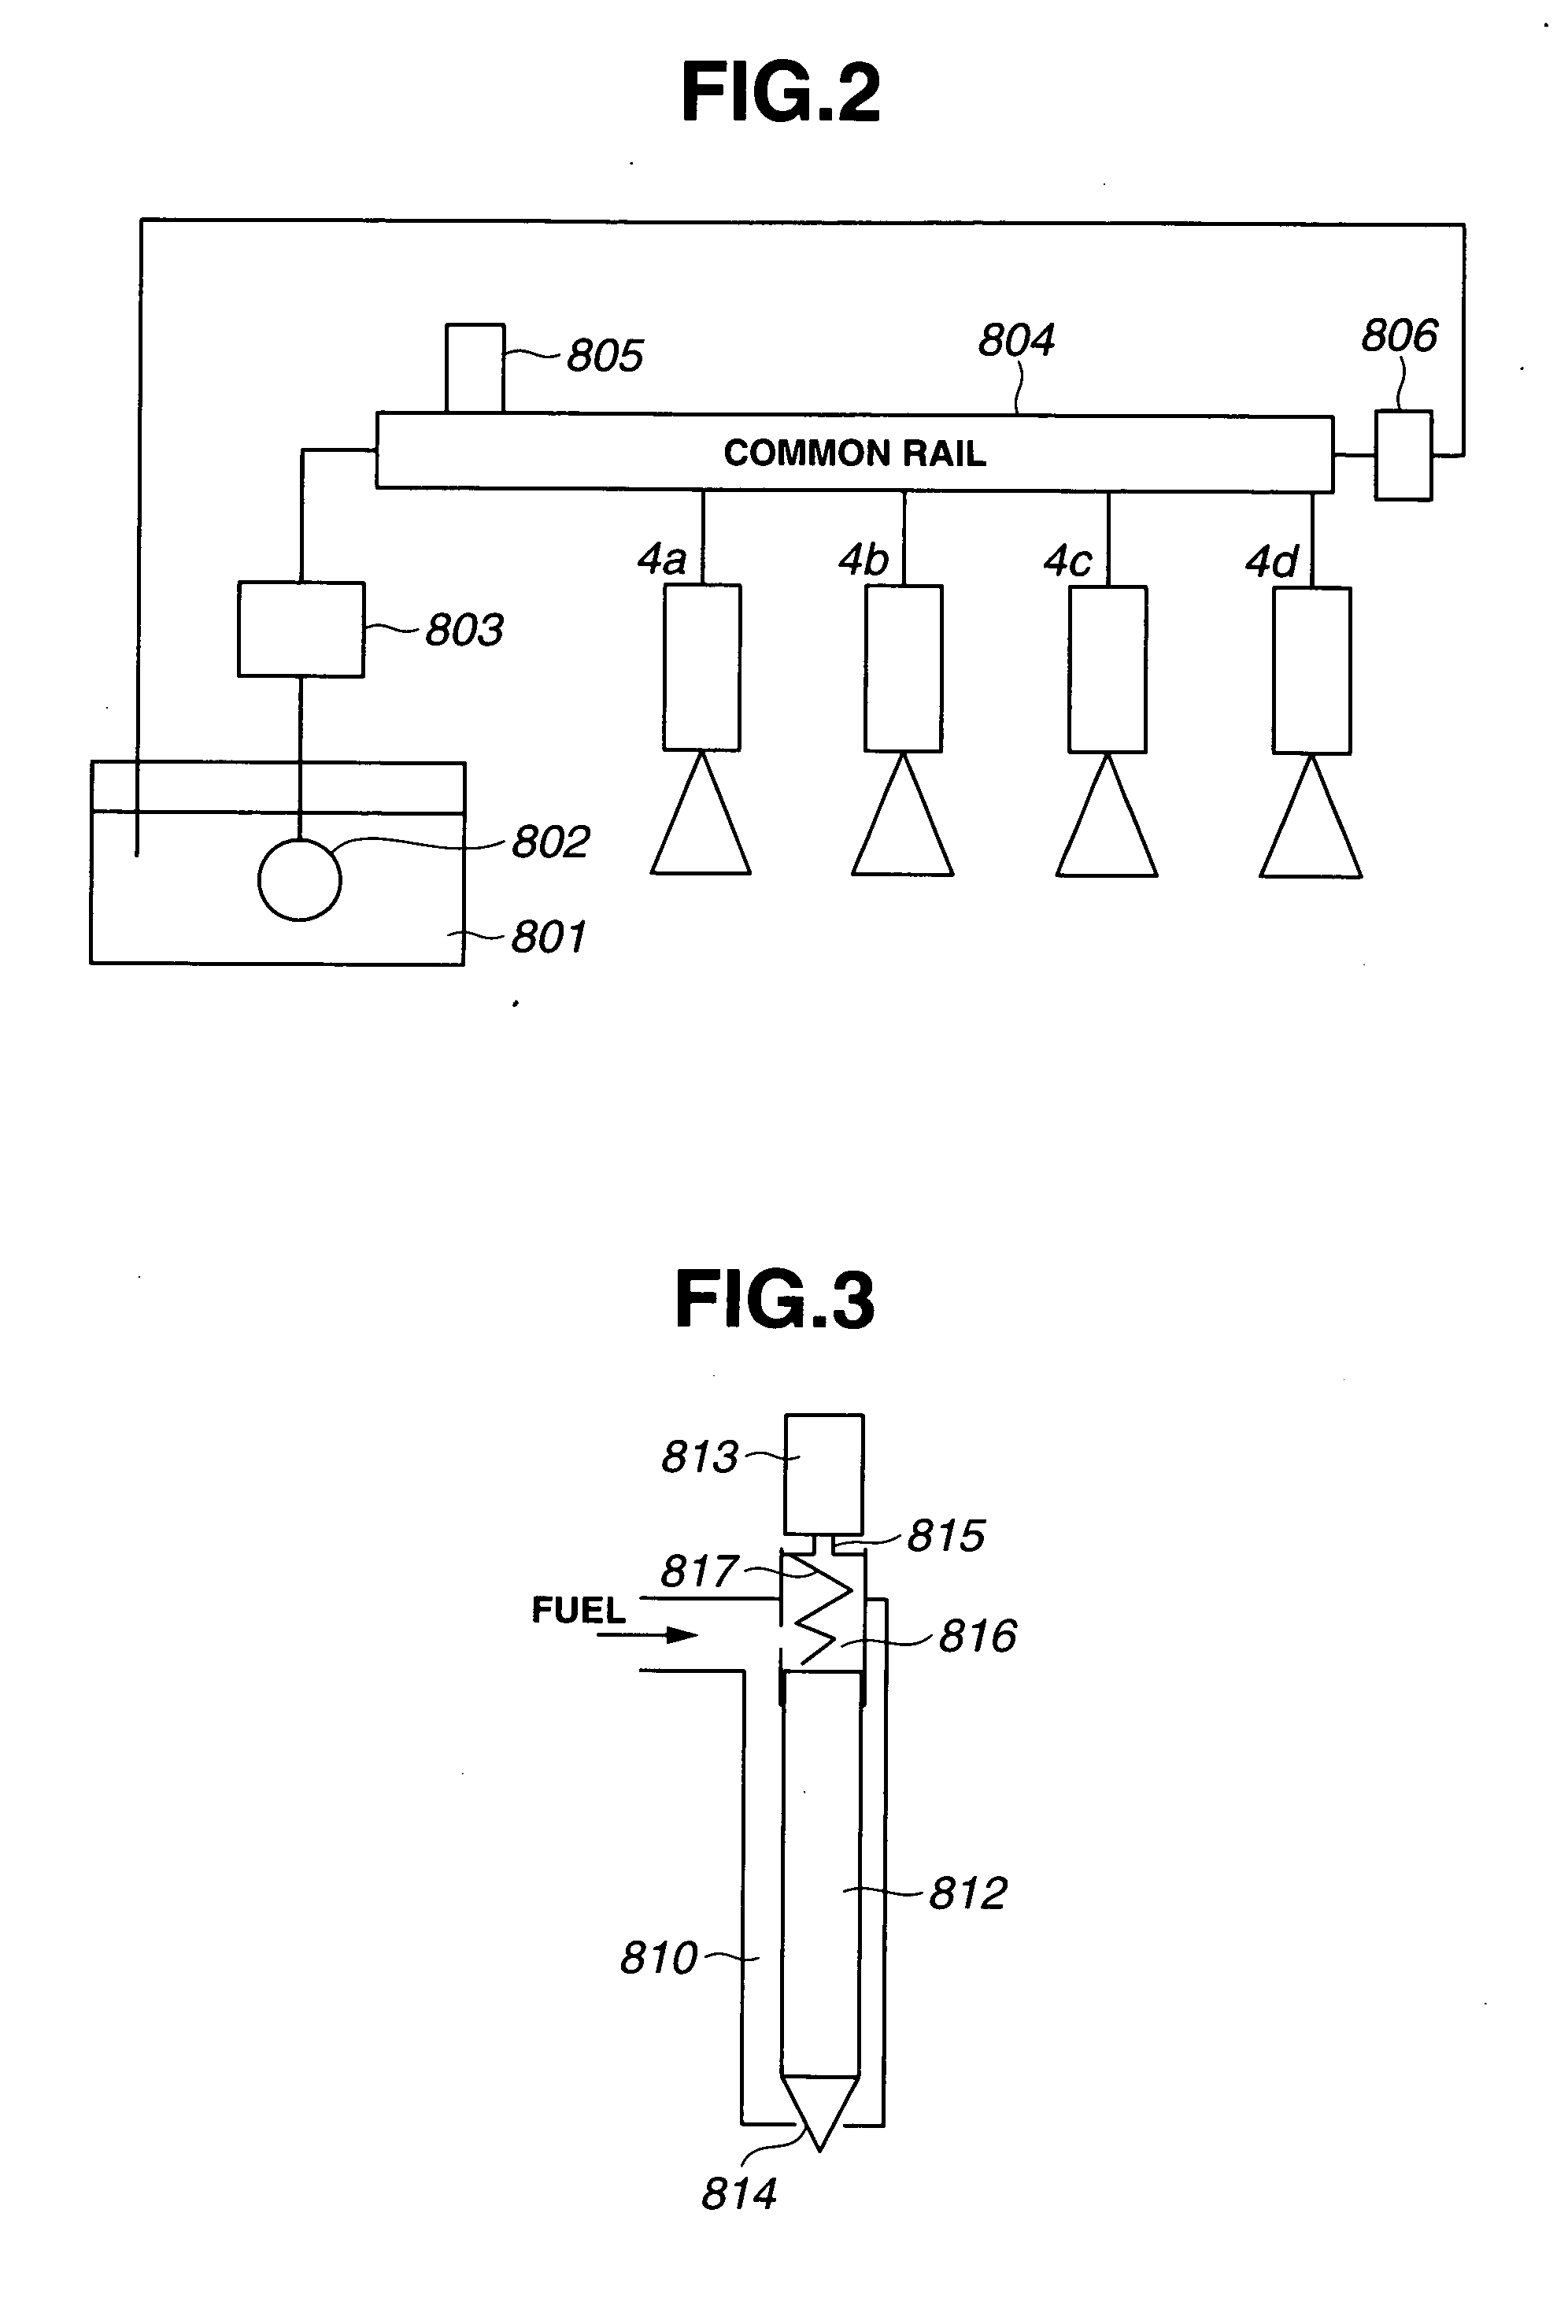 Multistage fuel-injection internal combustion engine